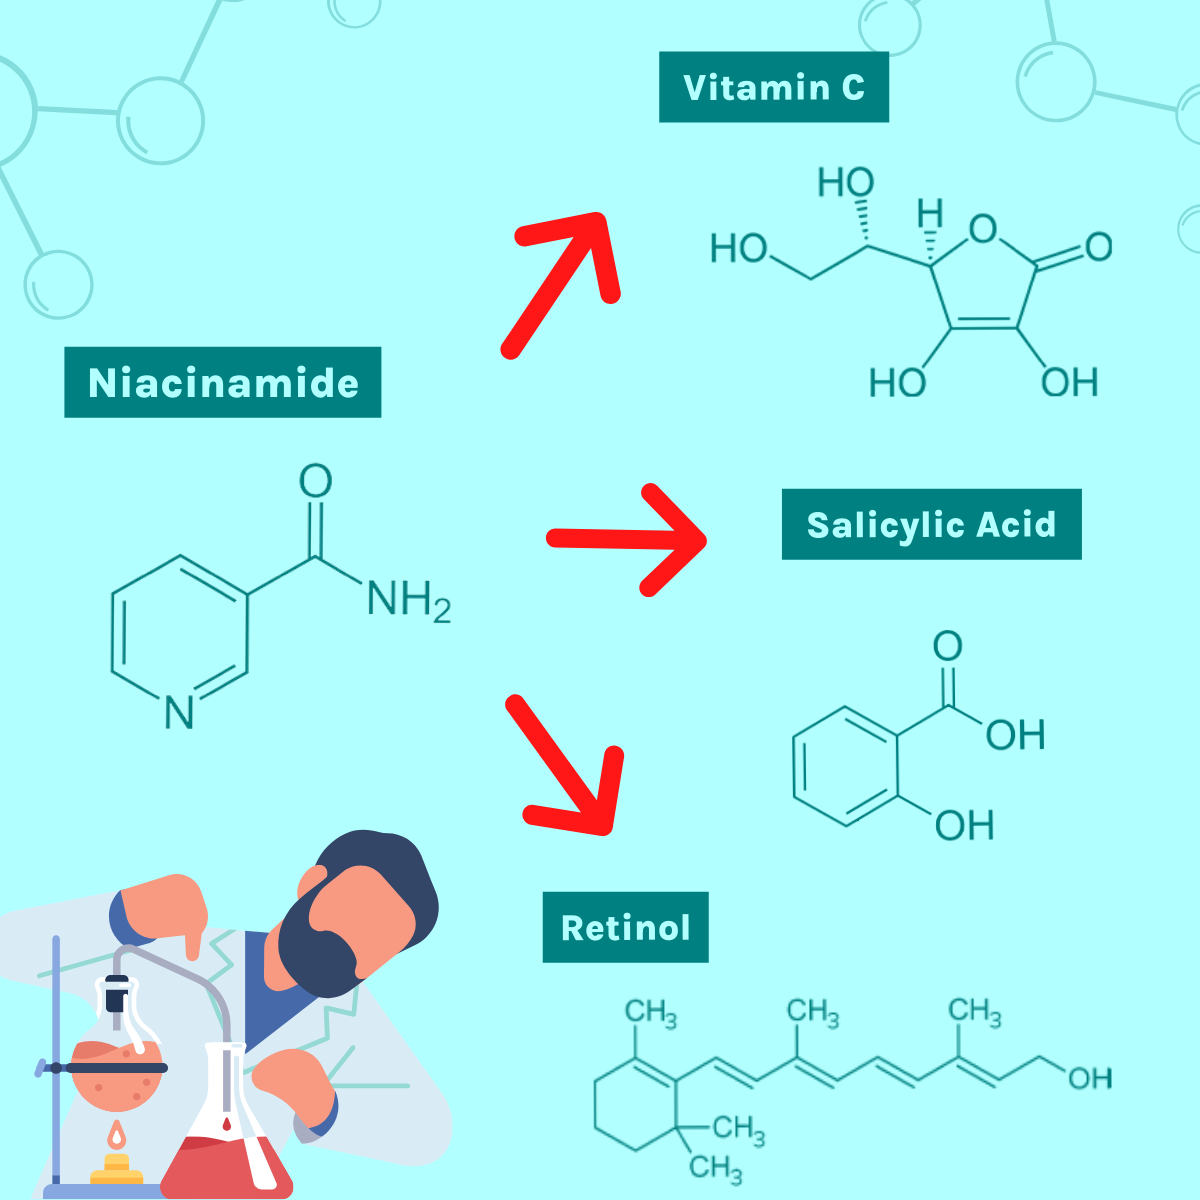 What Can You Use Together with Niacinamide?